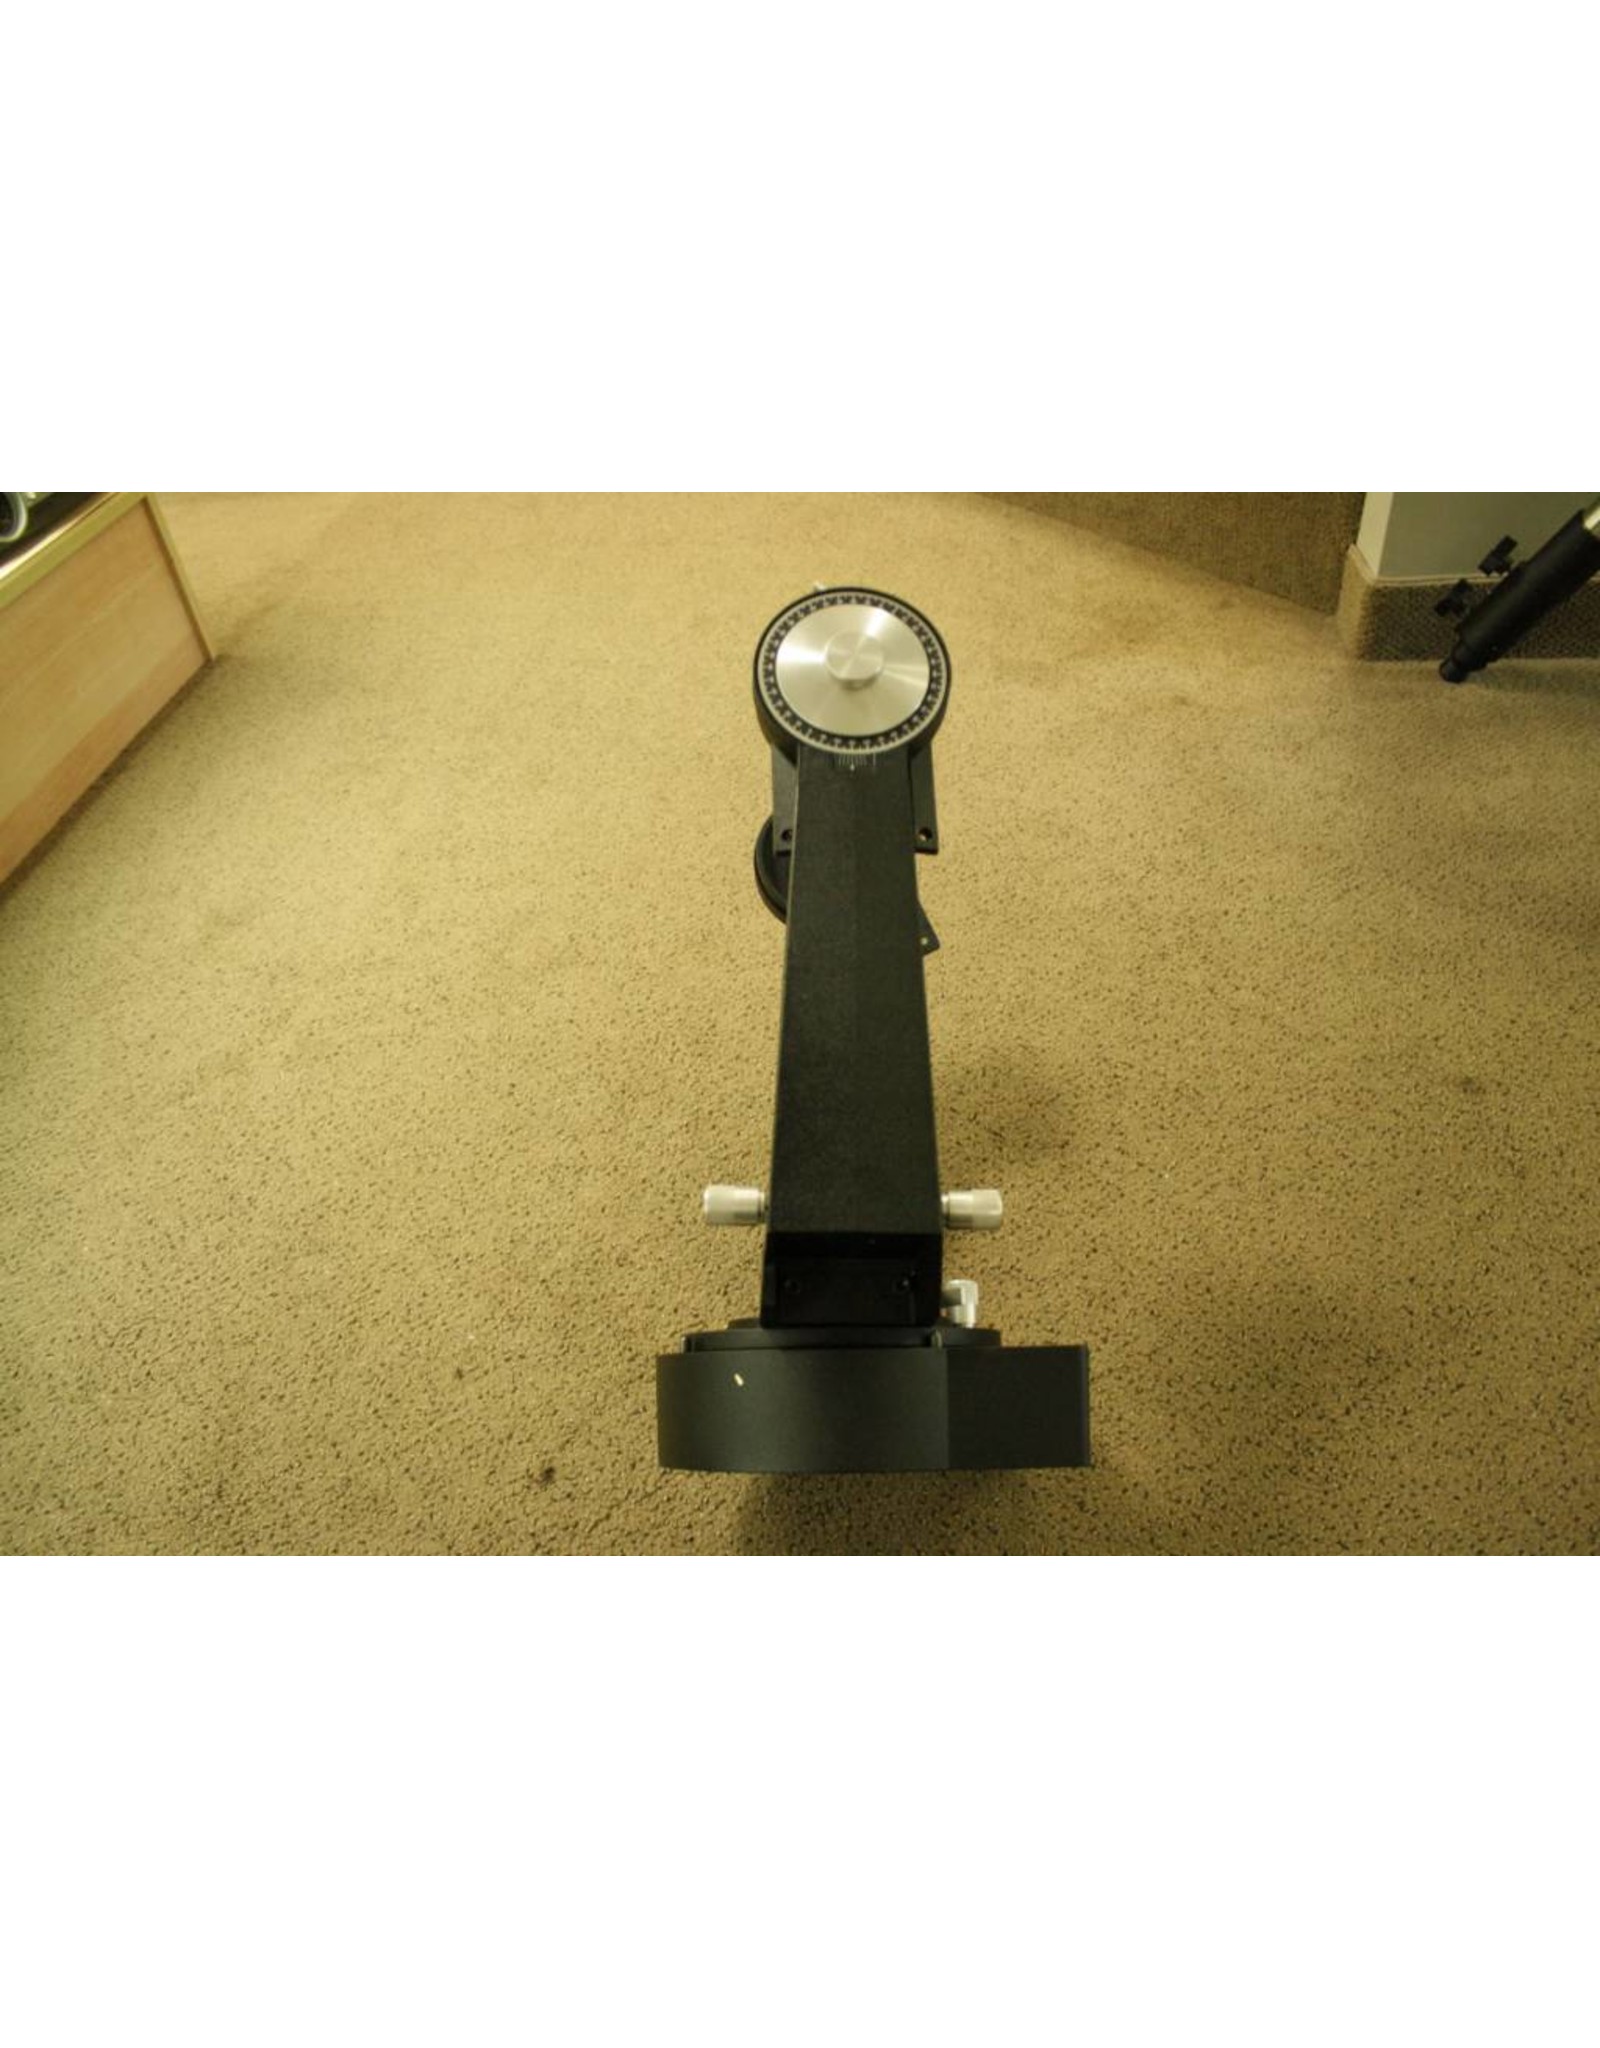 Meade Meade Original Fork Arm Assembly for Model 2080 8" Check hole alignment with C8 Vintage OTA No AC cord available